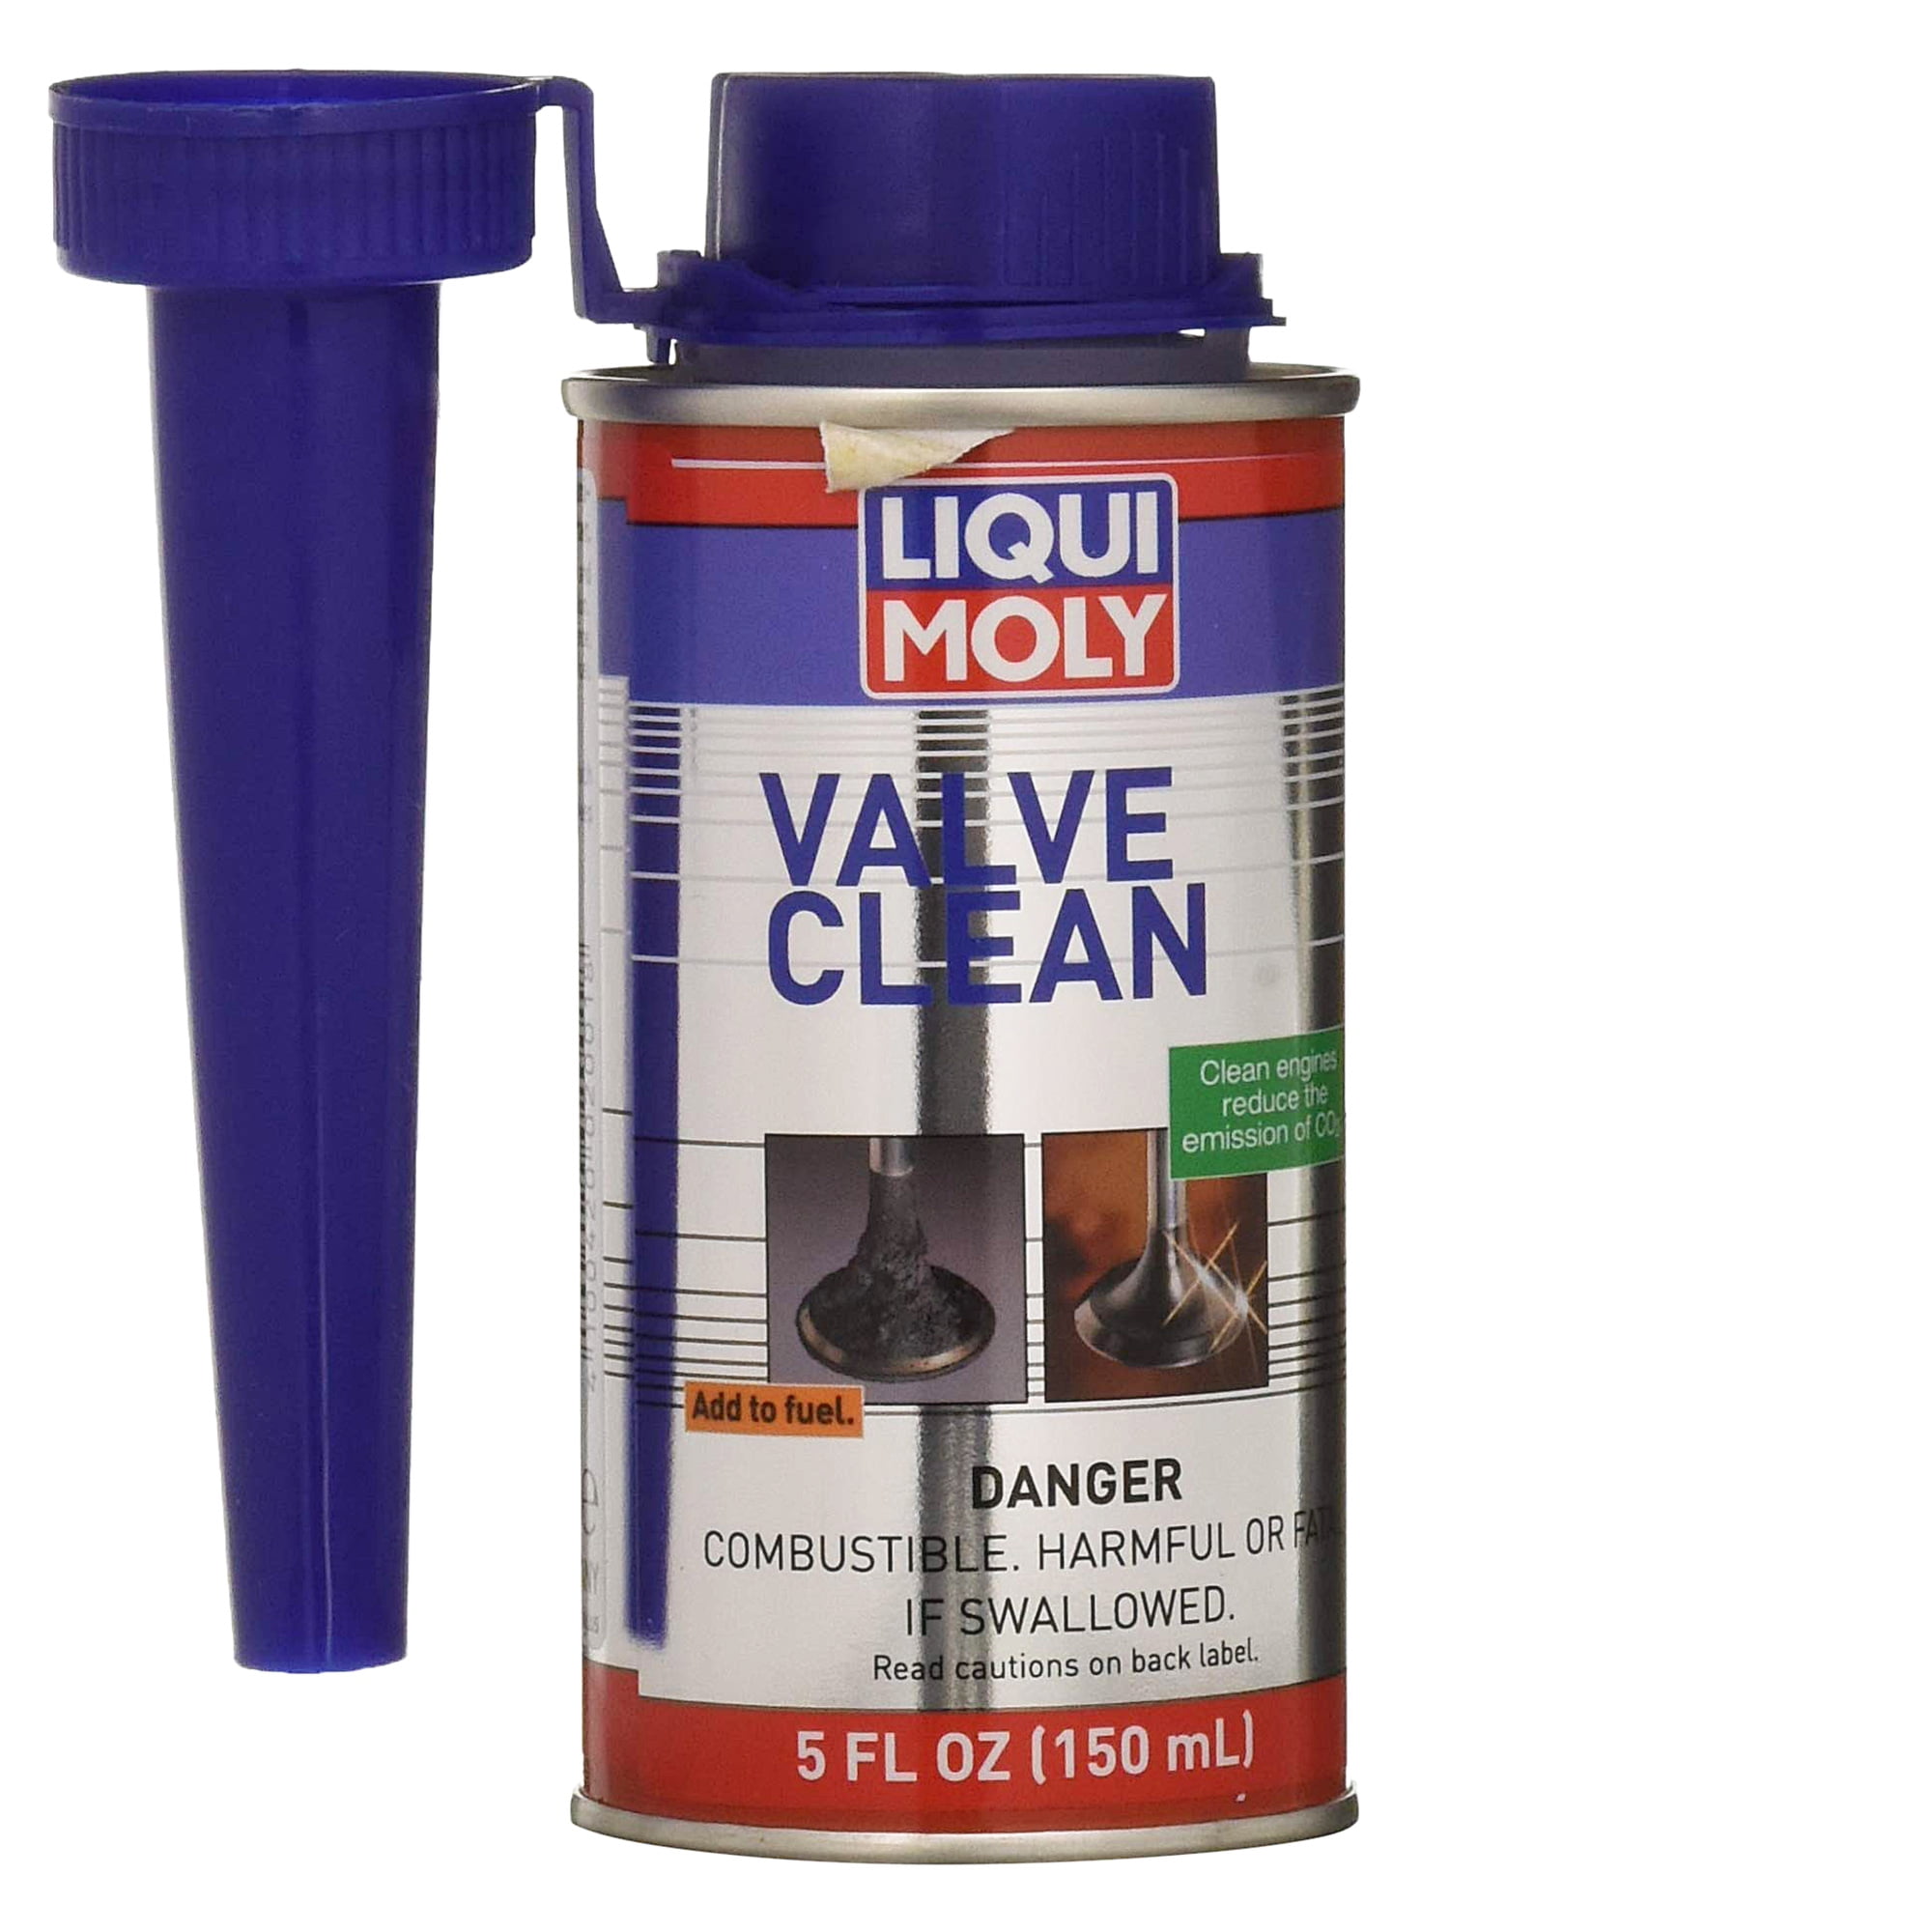 Complete Car Care Cleaning Kit - Liqui Moly LMCC3